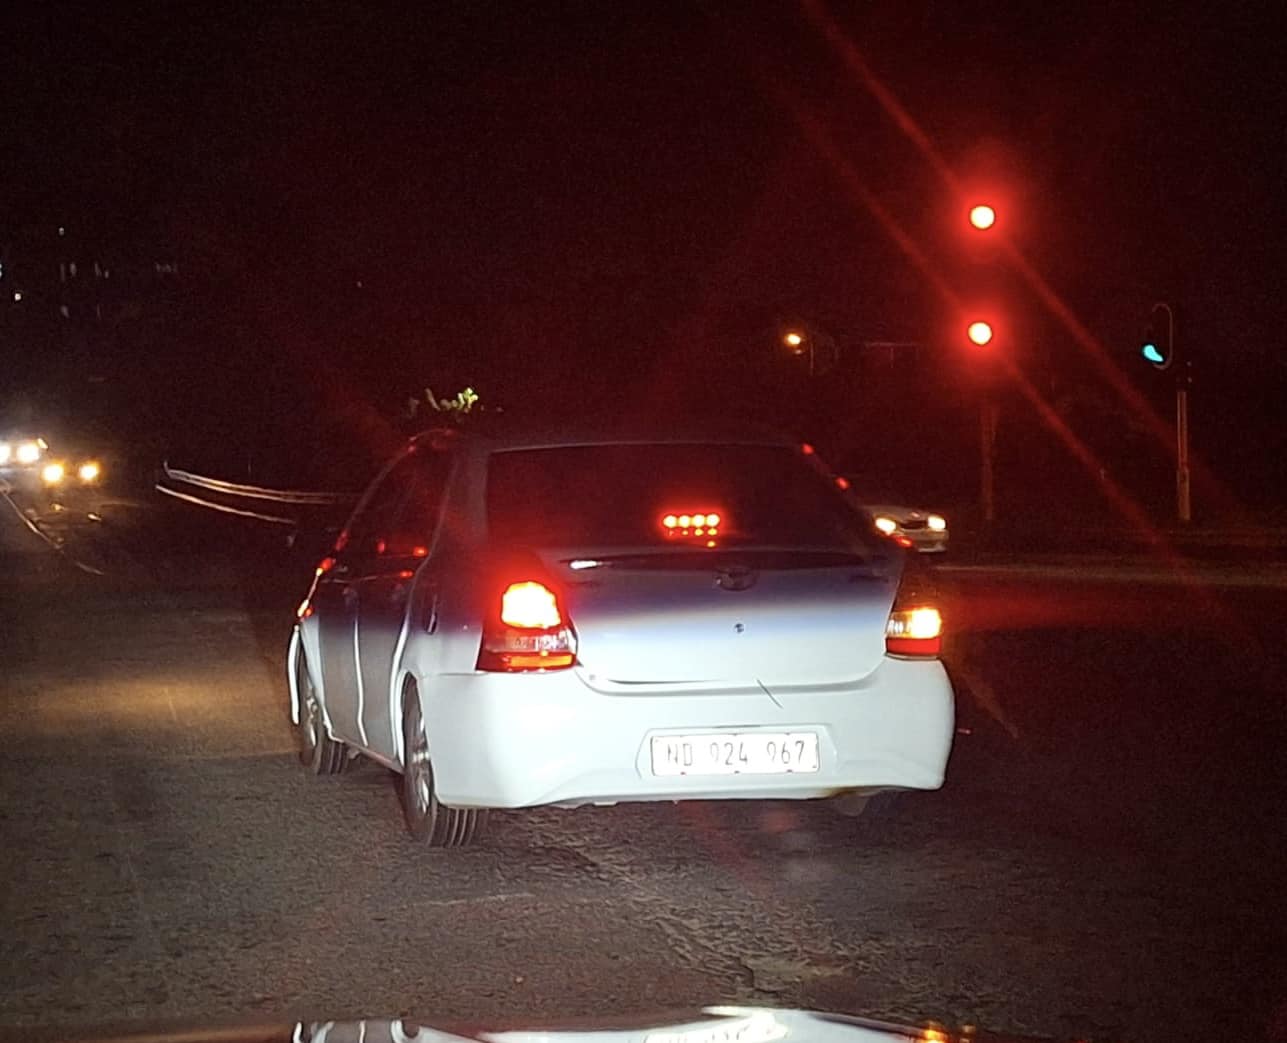 Dead body spotted in a vehicle in Verulam